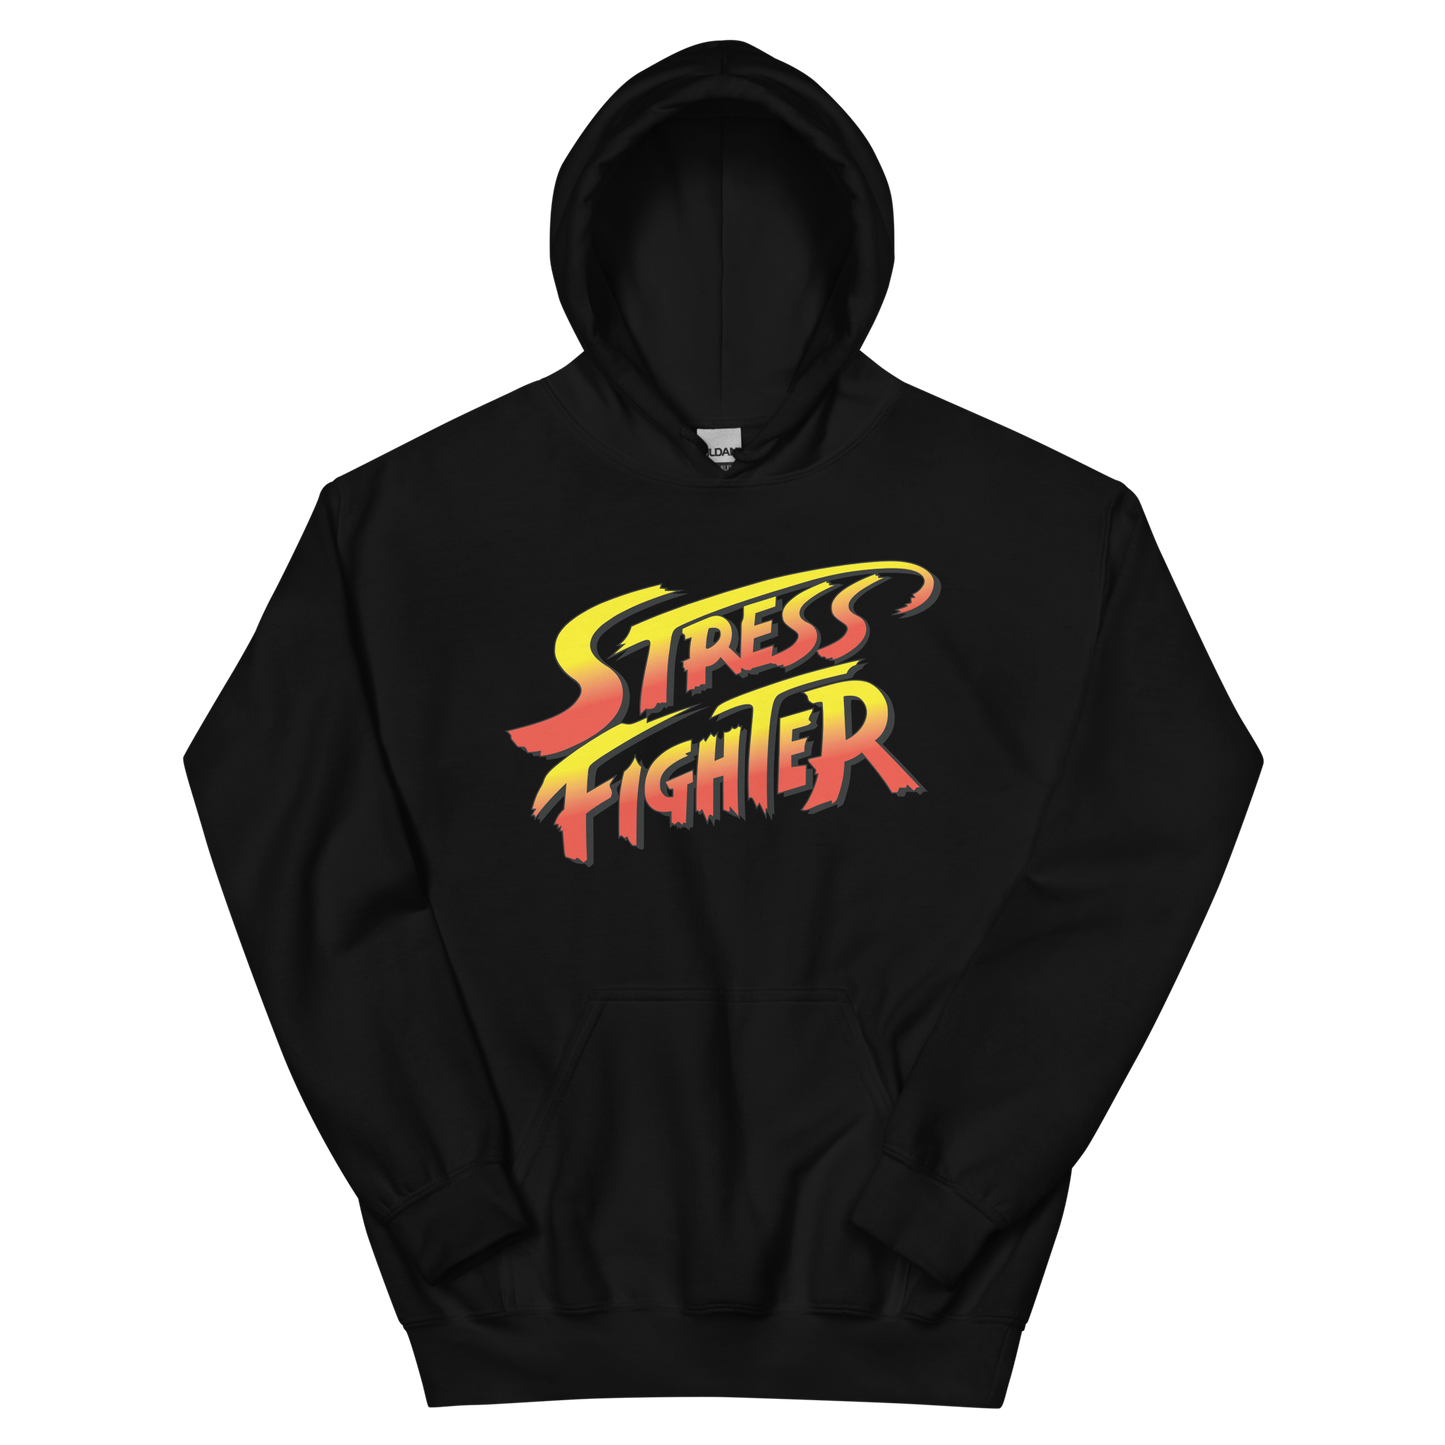 Stress Fighter Graphic Hoodie